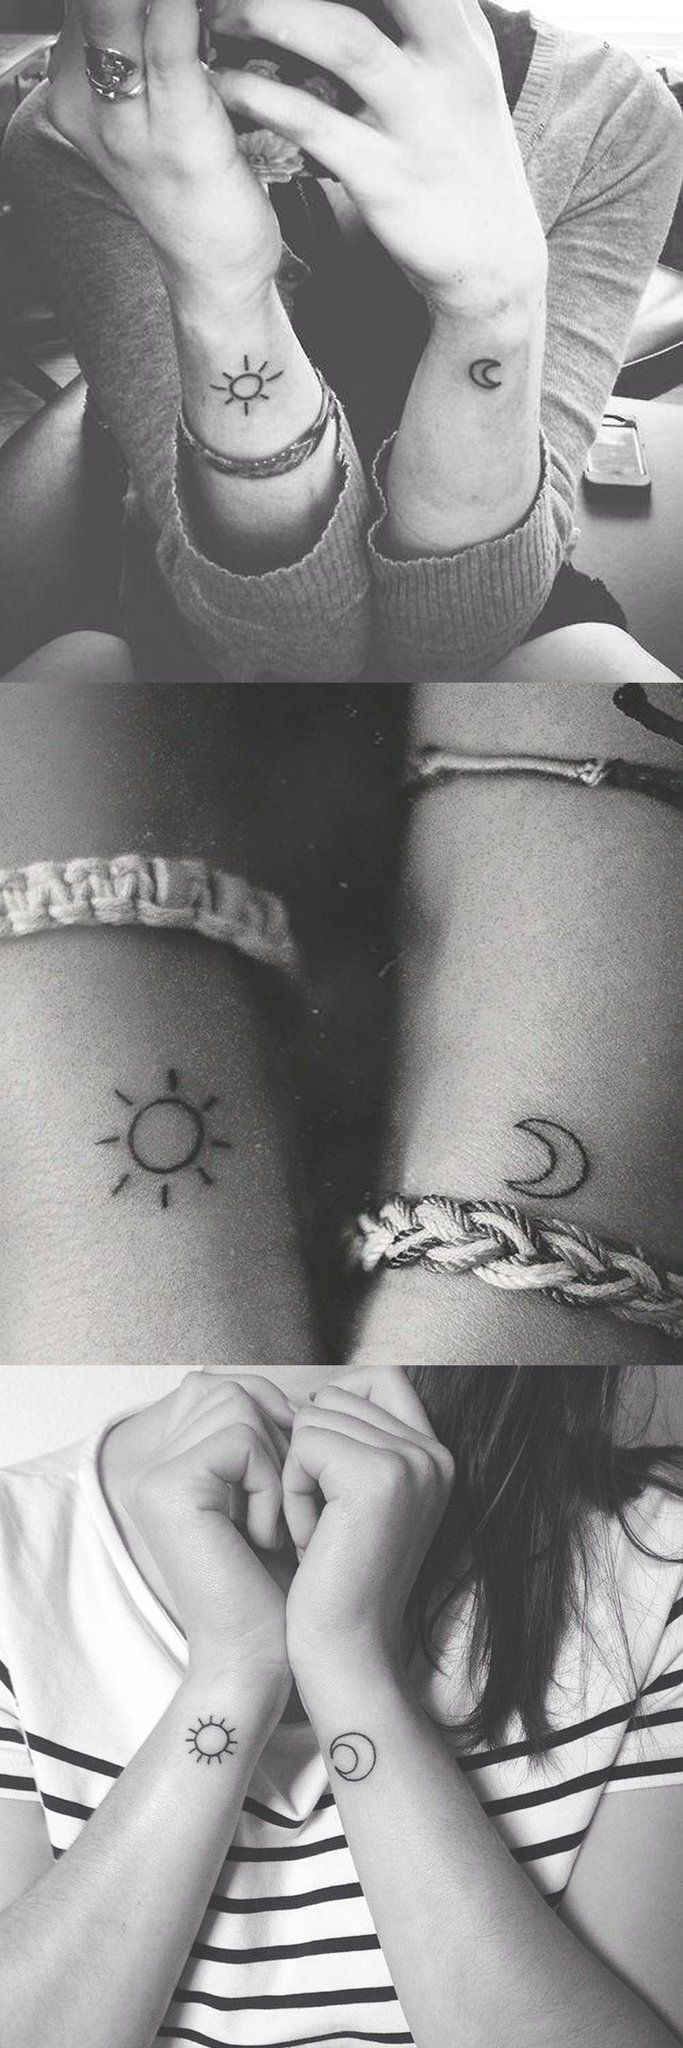 50 Perfectly Small Tattoos That Can Be Covered or Shown at Will |  CafeMom.com